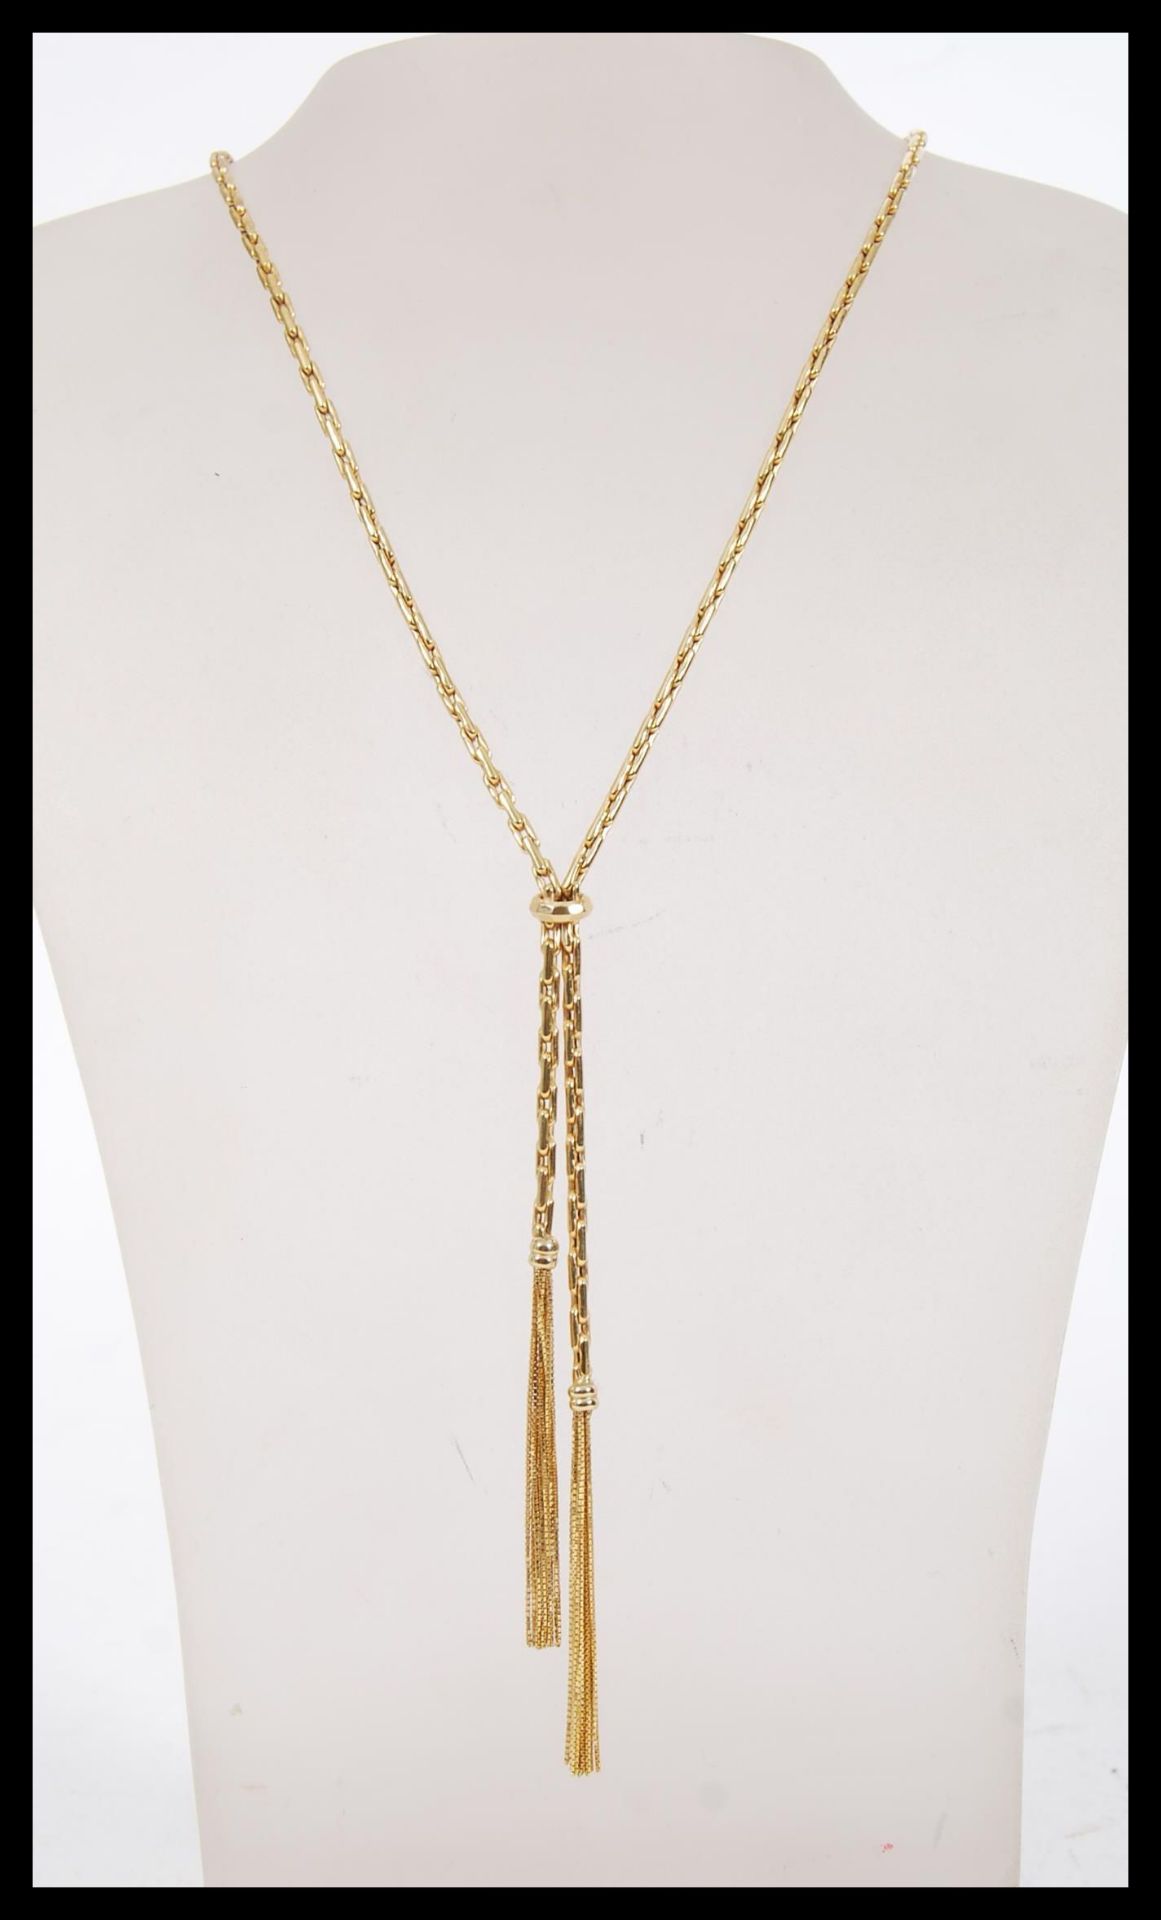 A hallmarked 9ct gold long boxlink necklace chain, having a large bolt ring clasp, with tasseled - Image 2 of 4